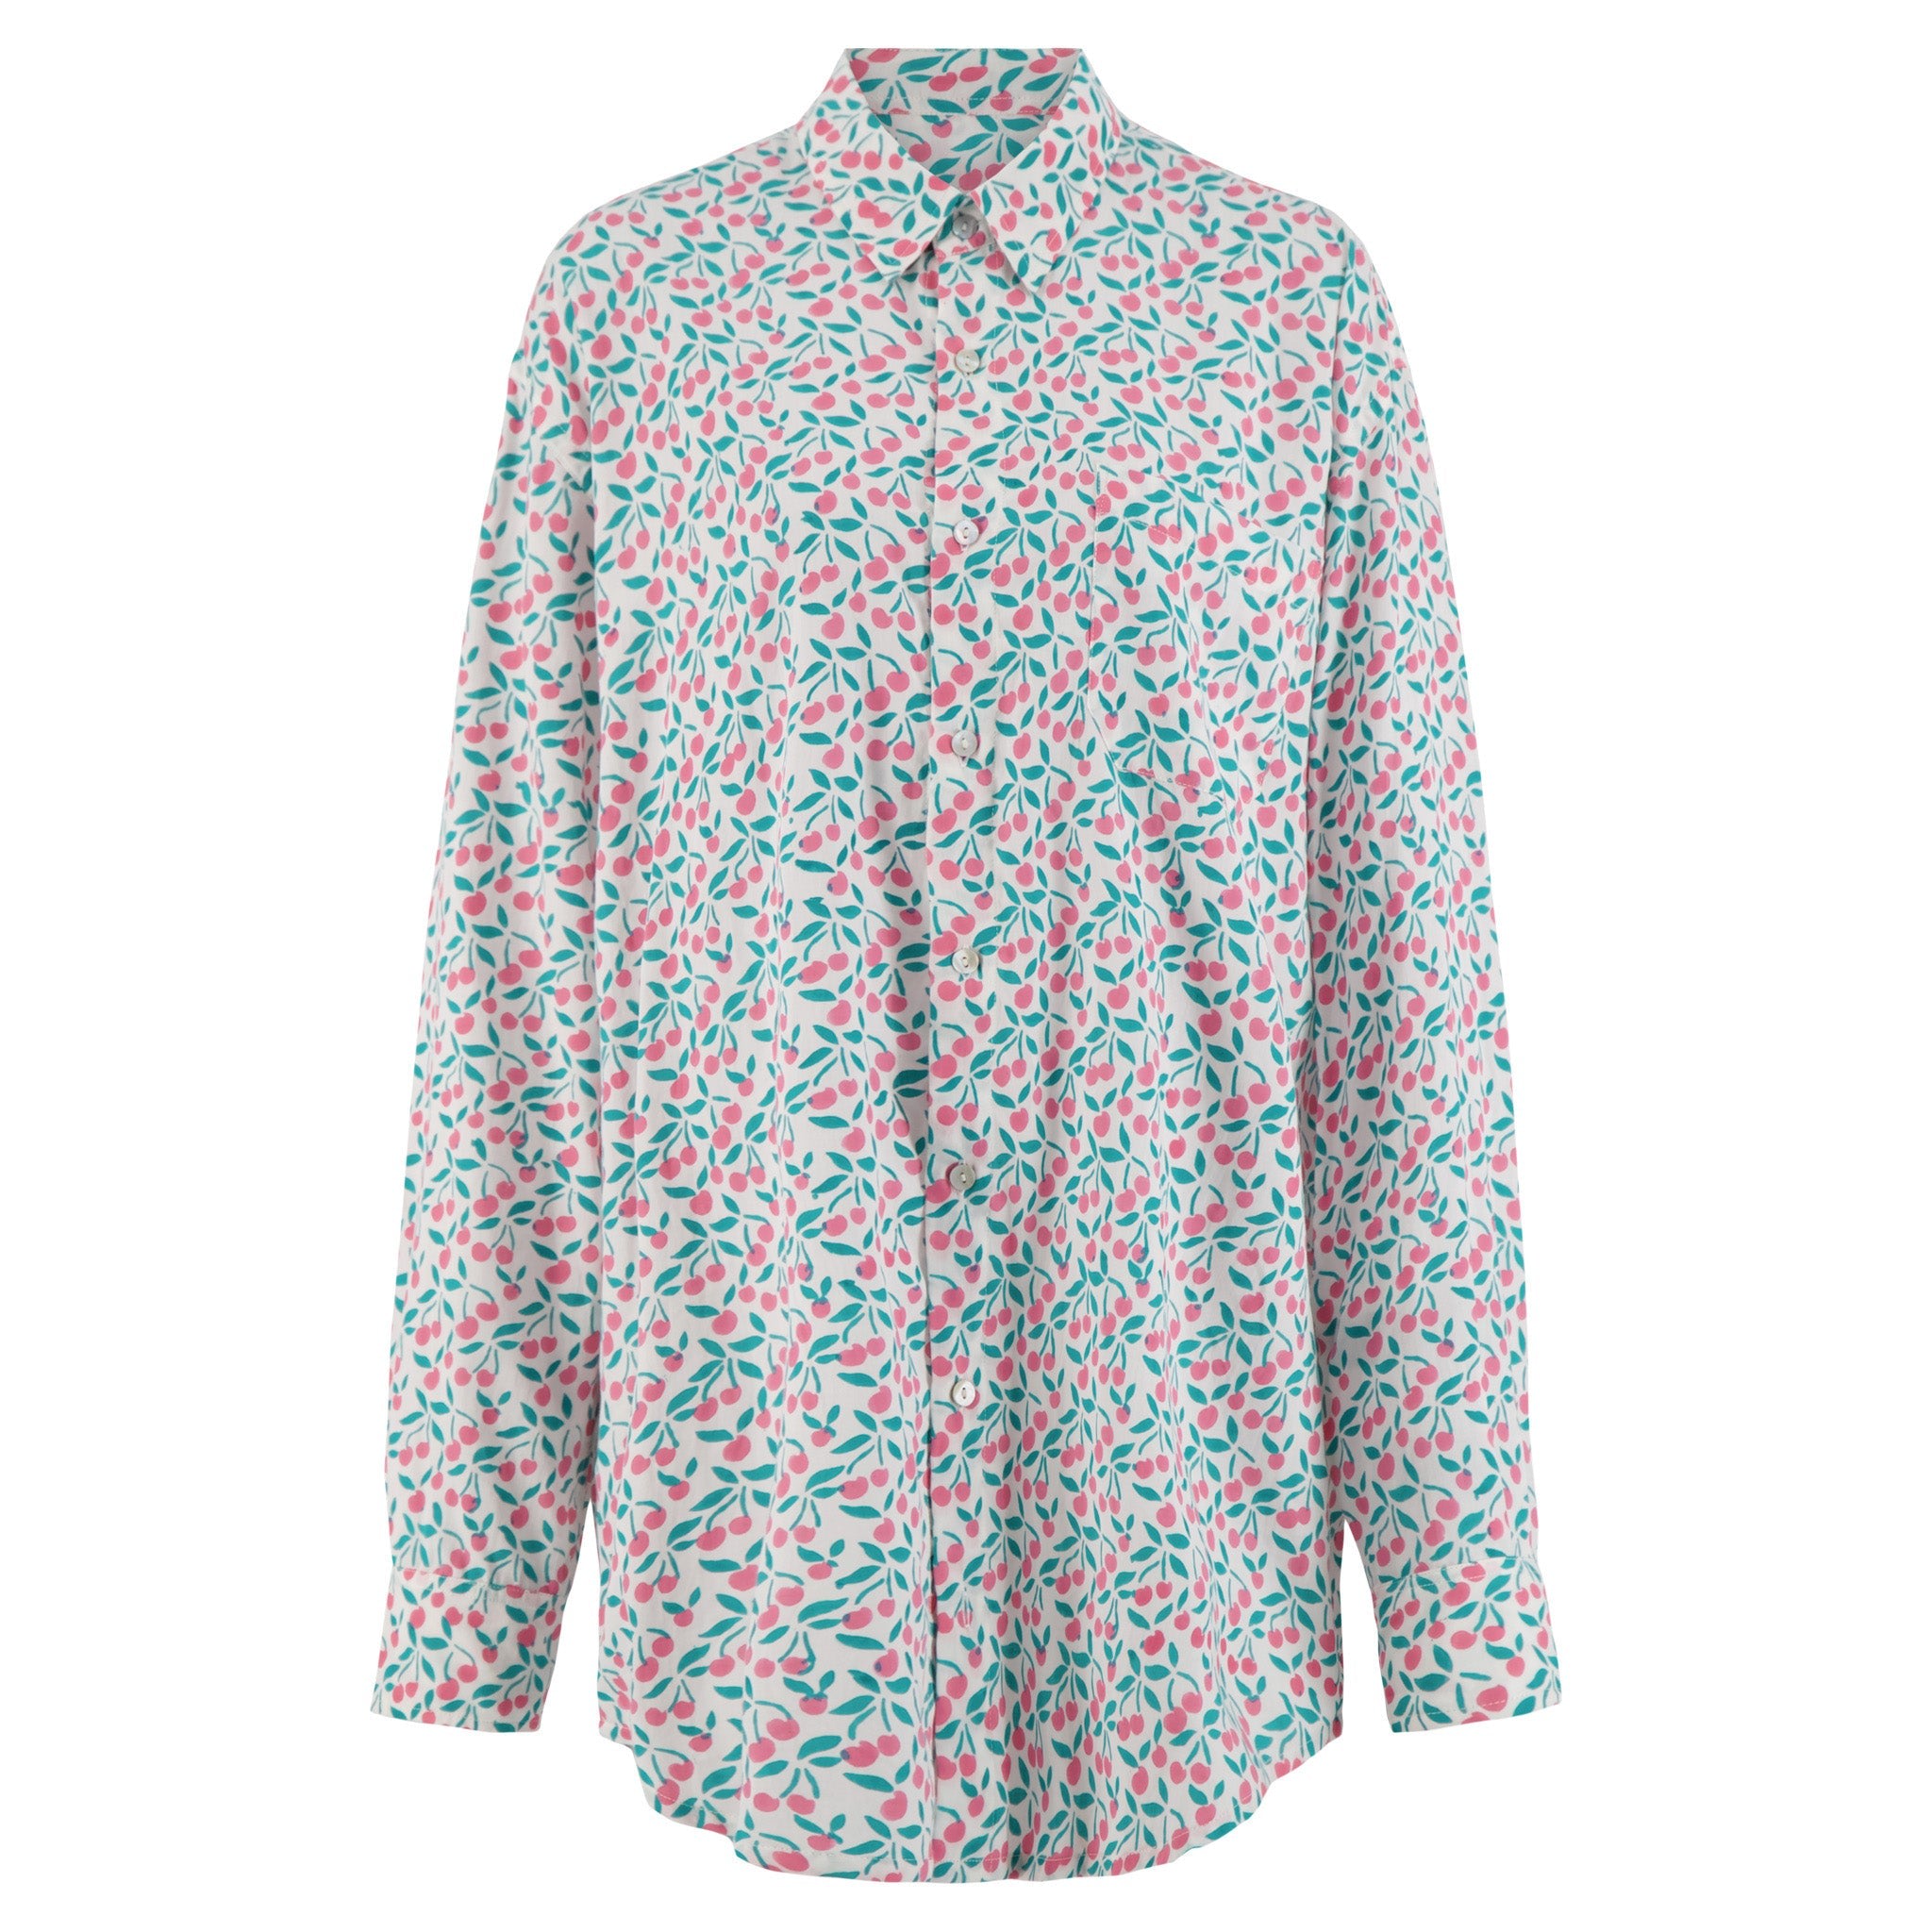 Women’s Blue / White / Pink Claude Organic Cotton Button Up Boyfriend Shirt With Front Pocket And Long Sleeves In Aqua And Pink Cherries Block Print One Size Kate Austin Designs